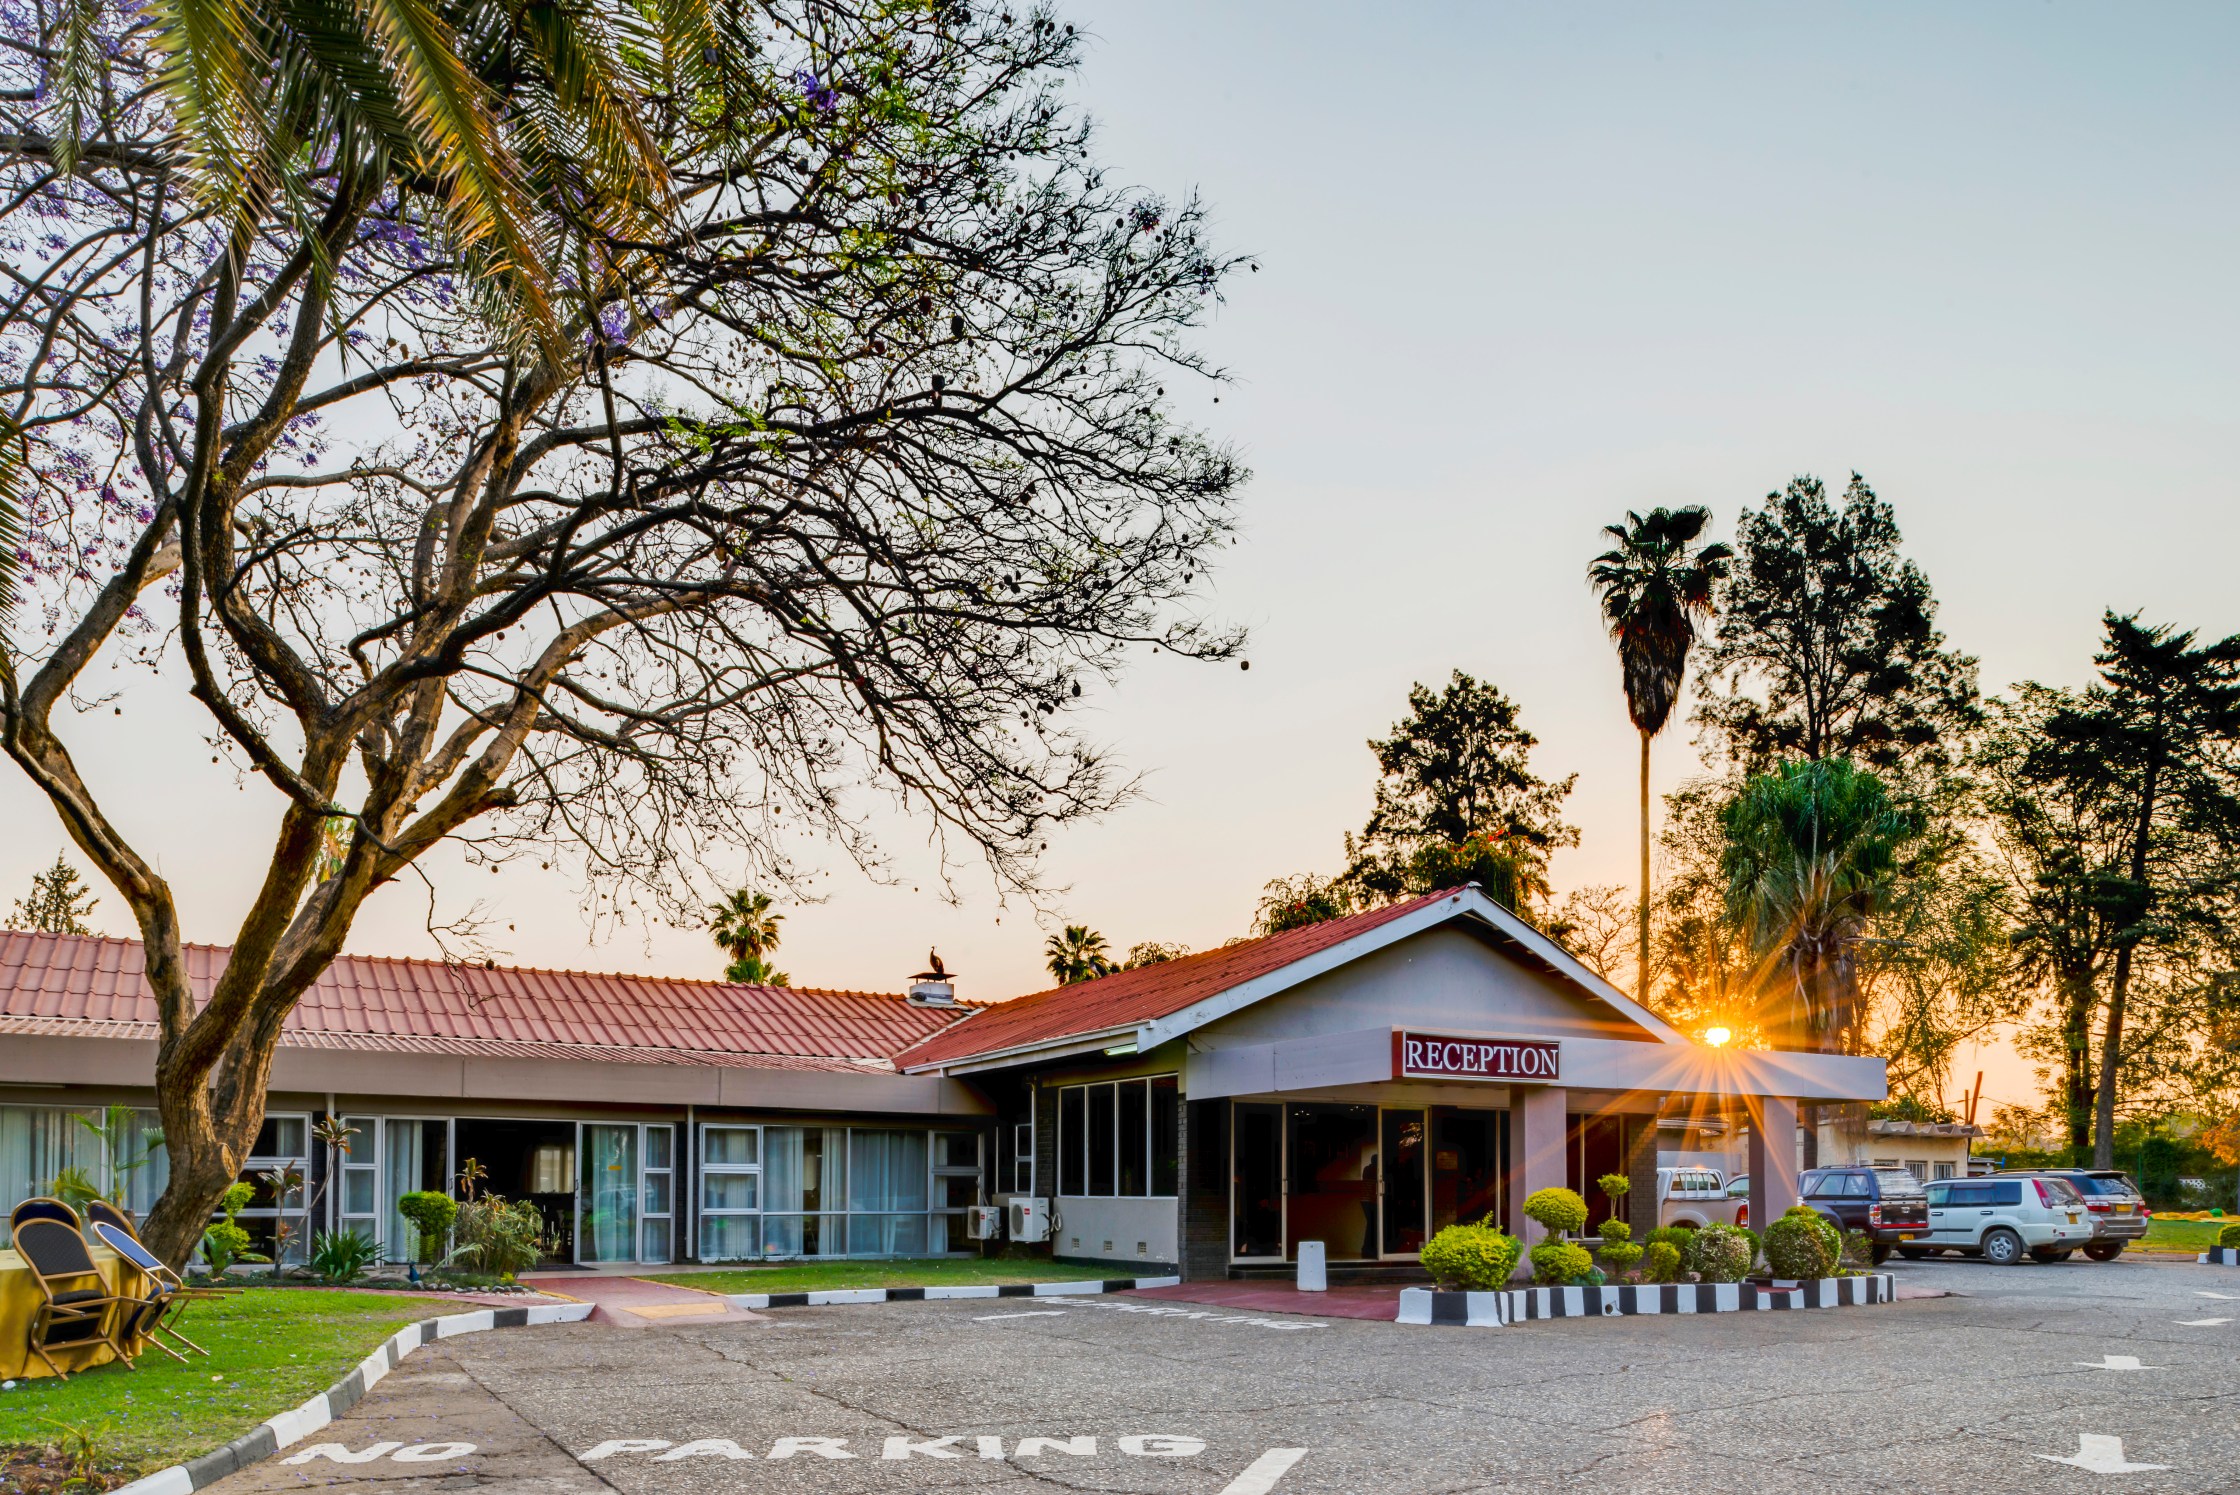 Kadoma Hotel and Conference Centre